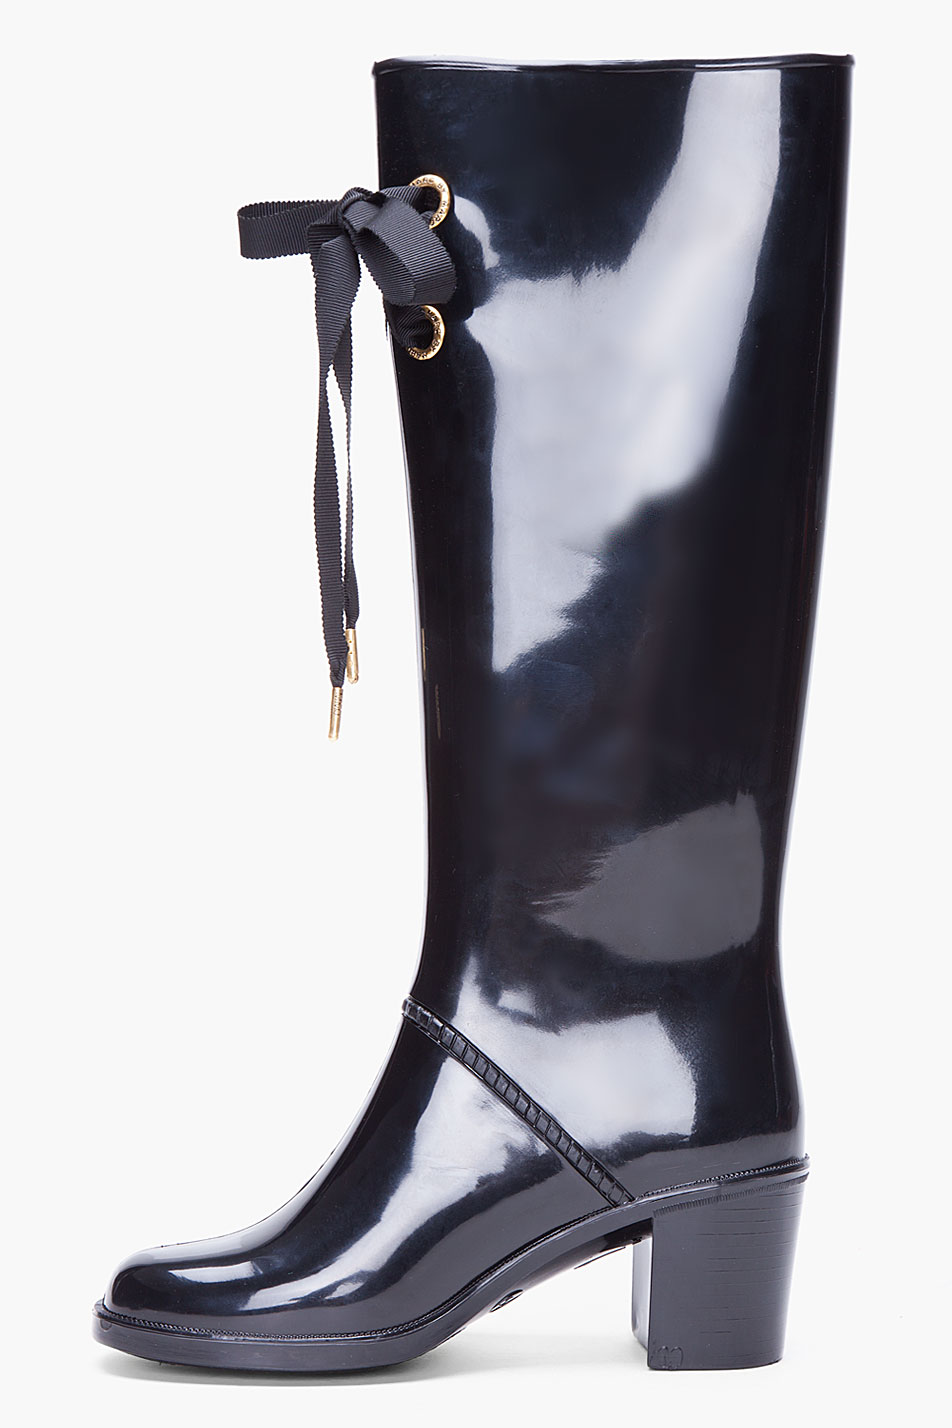 Marc By Marc Jacobs Black High Heeled Rain Boots | Lyst